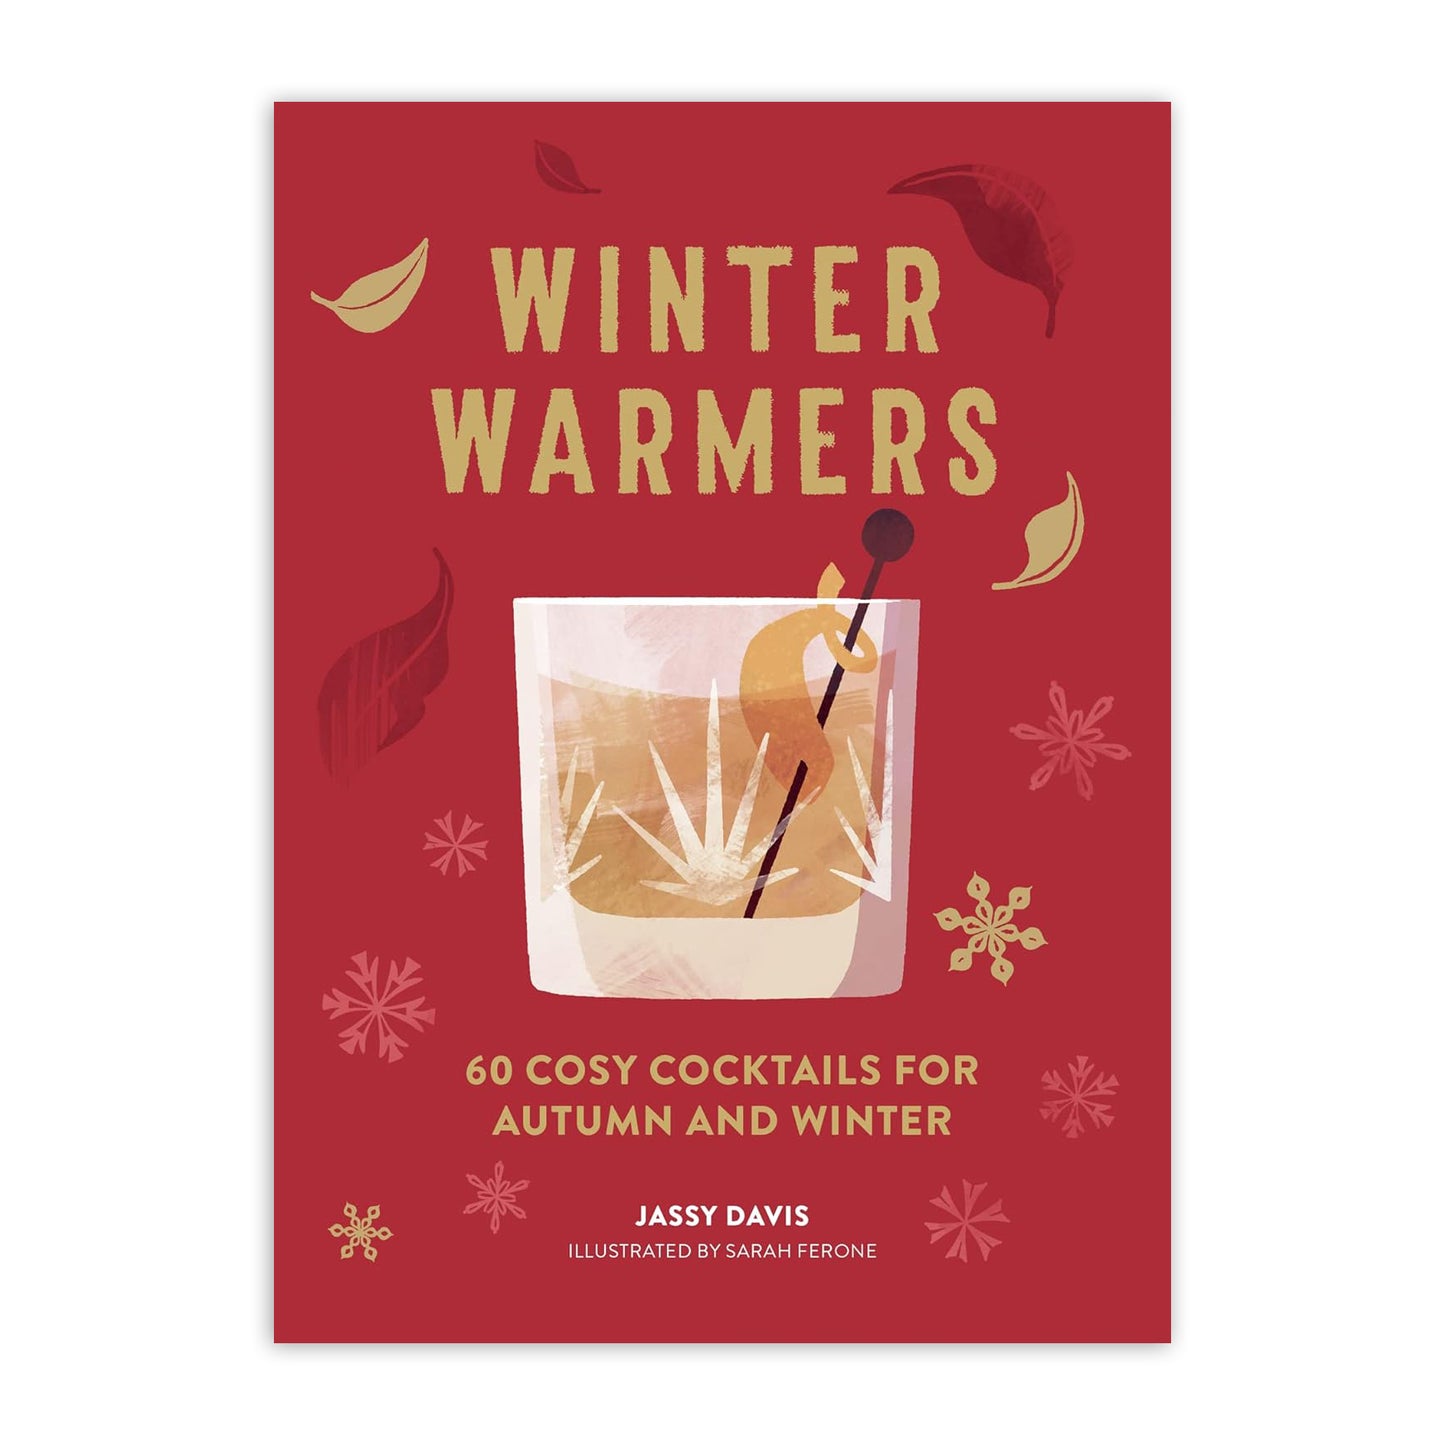 Winter Warmers: 60 Cosy Cocktails for Autumn and Winter Book